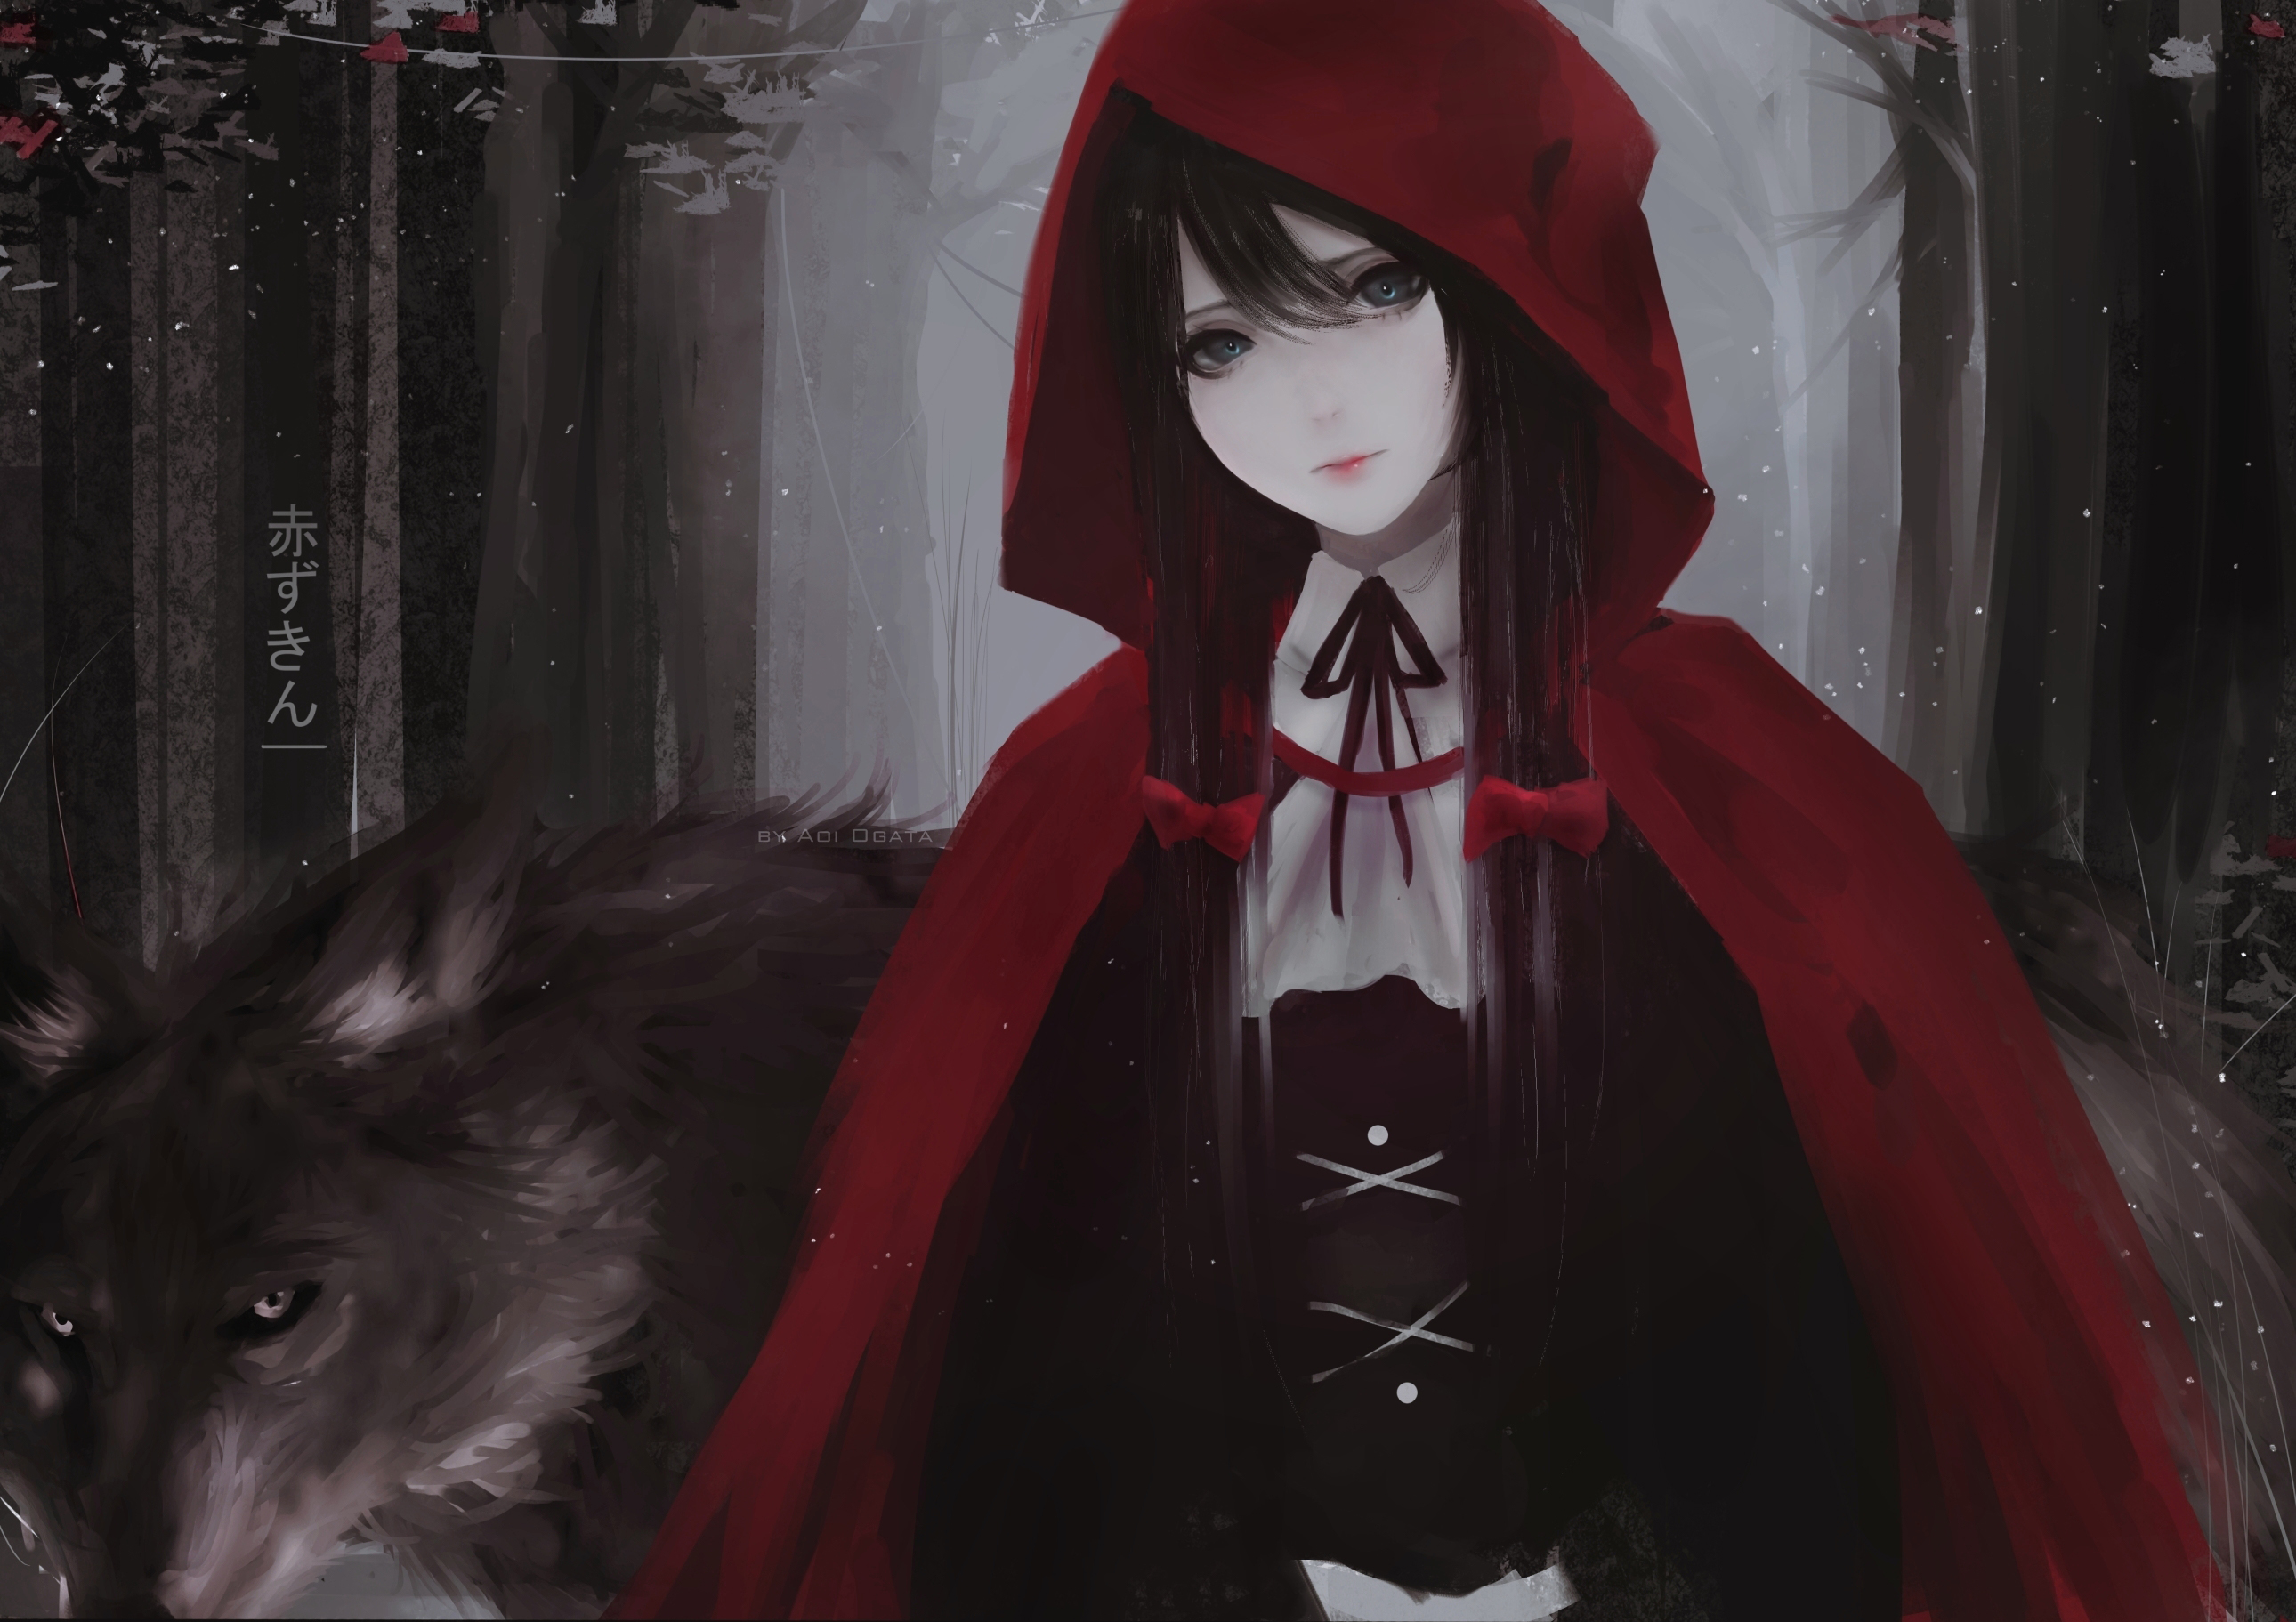 Red Riding Hood by Aoi Ogata